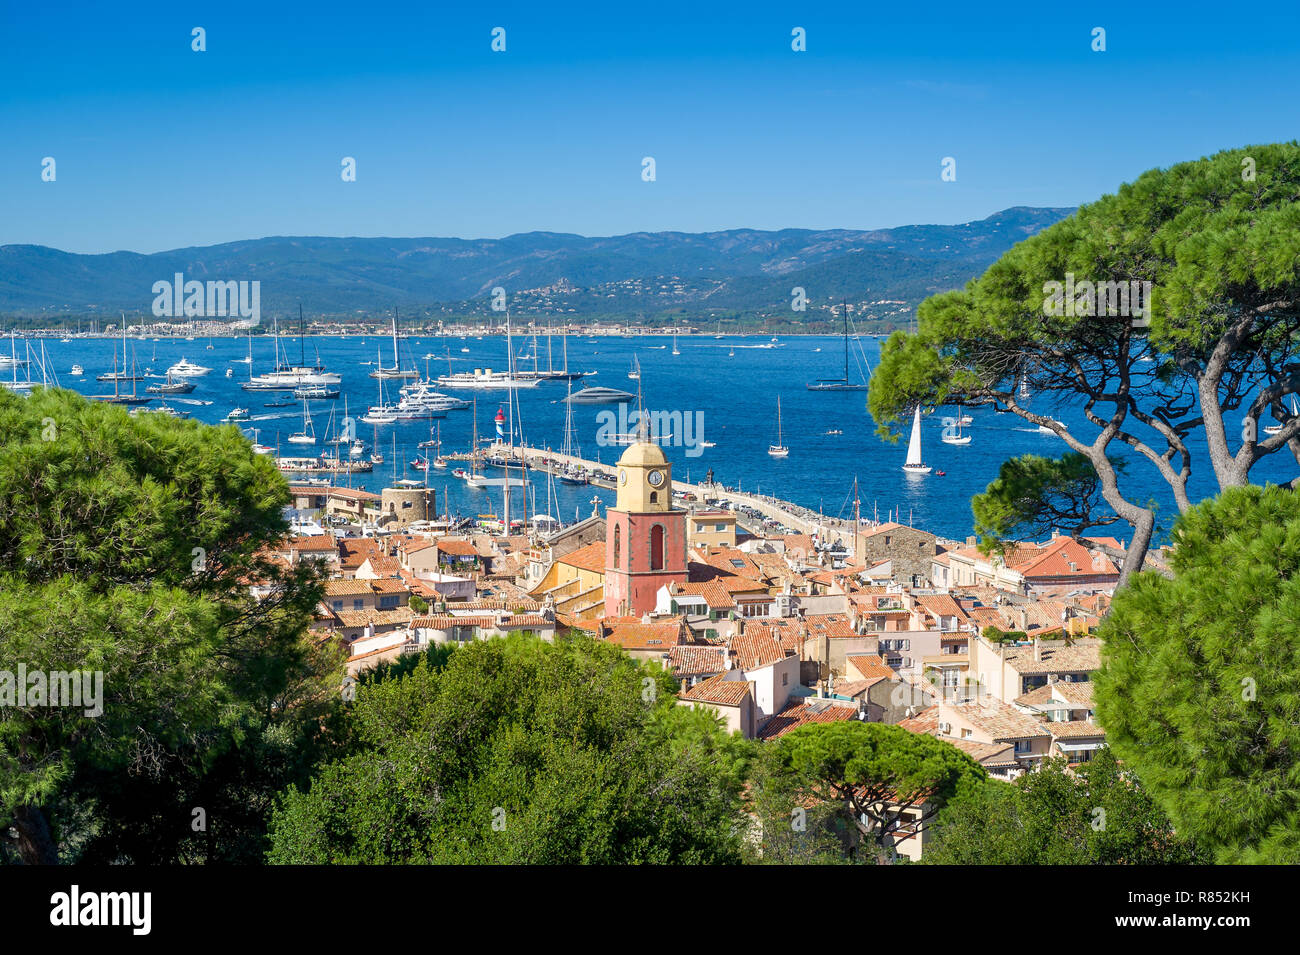 Saint-Tropez old town and yacht marina view from fortress on the hill. Provence Cote d'Azur, France. Stock Photo